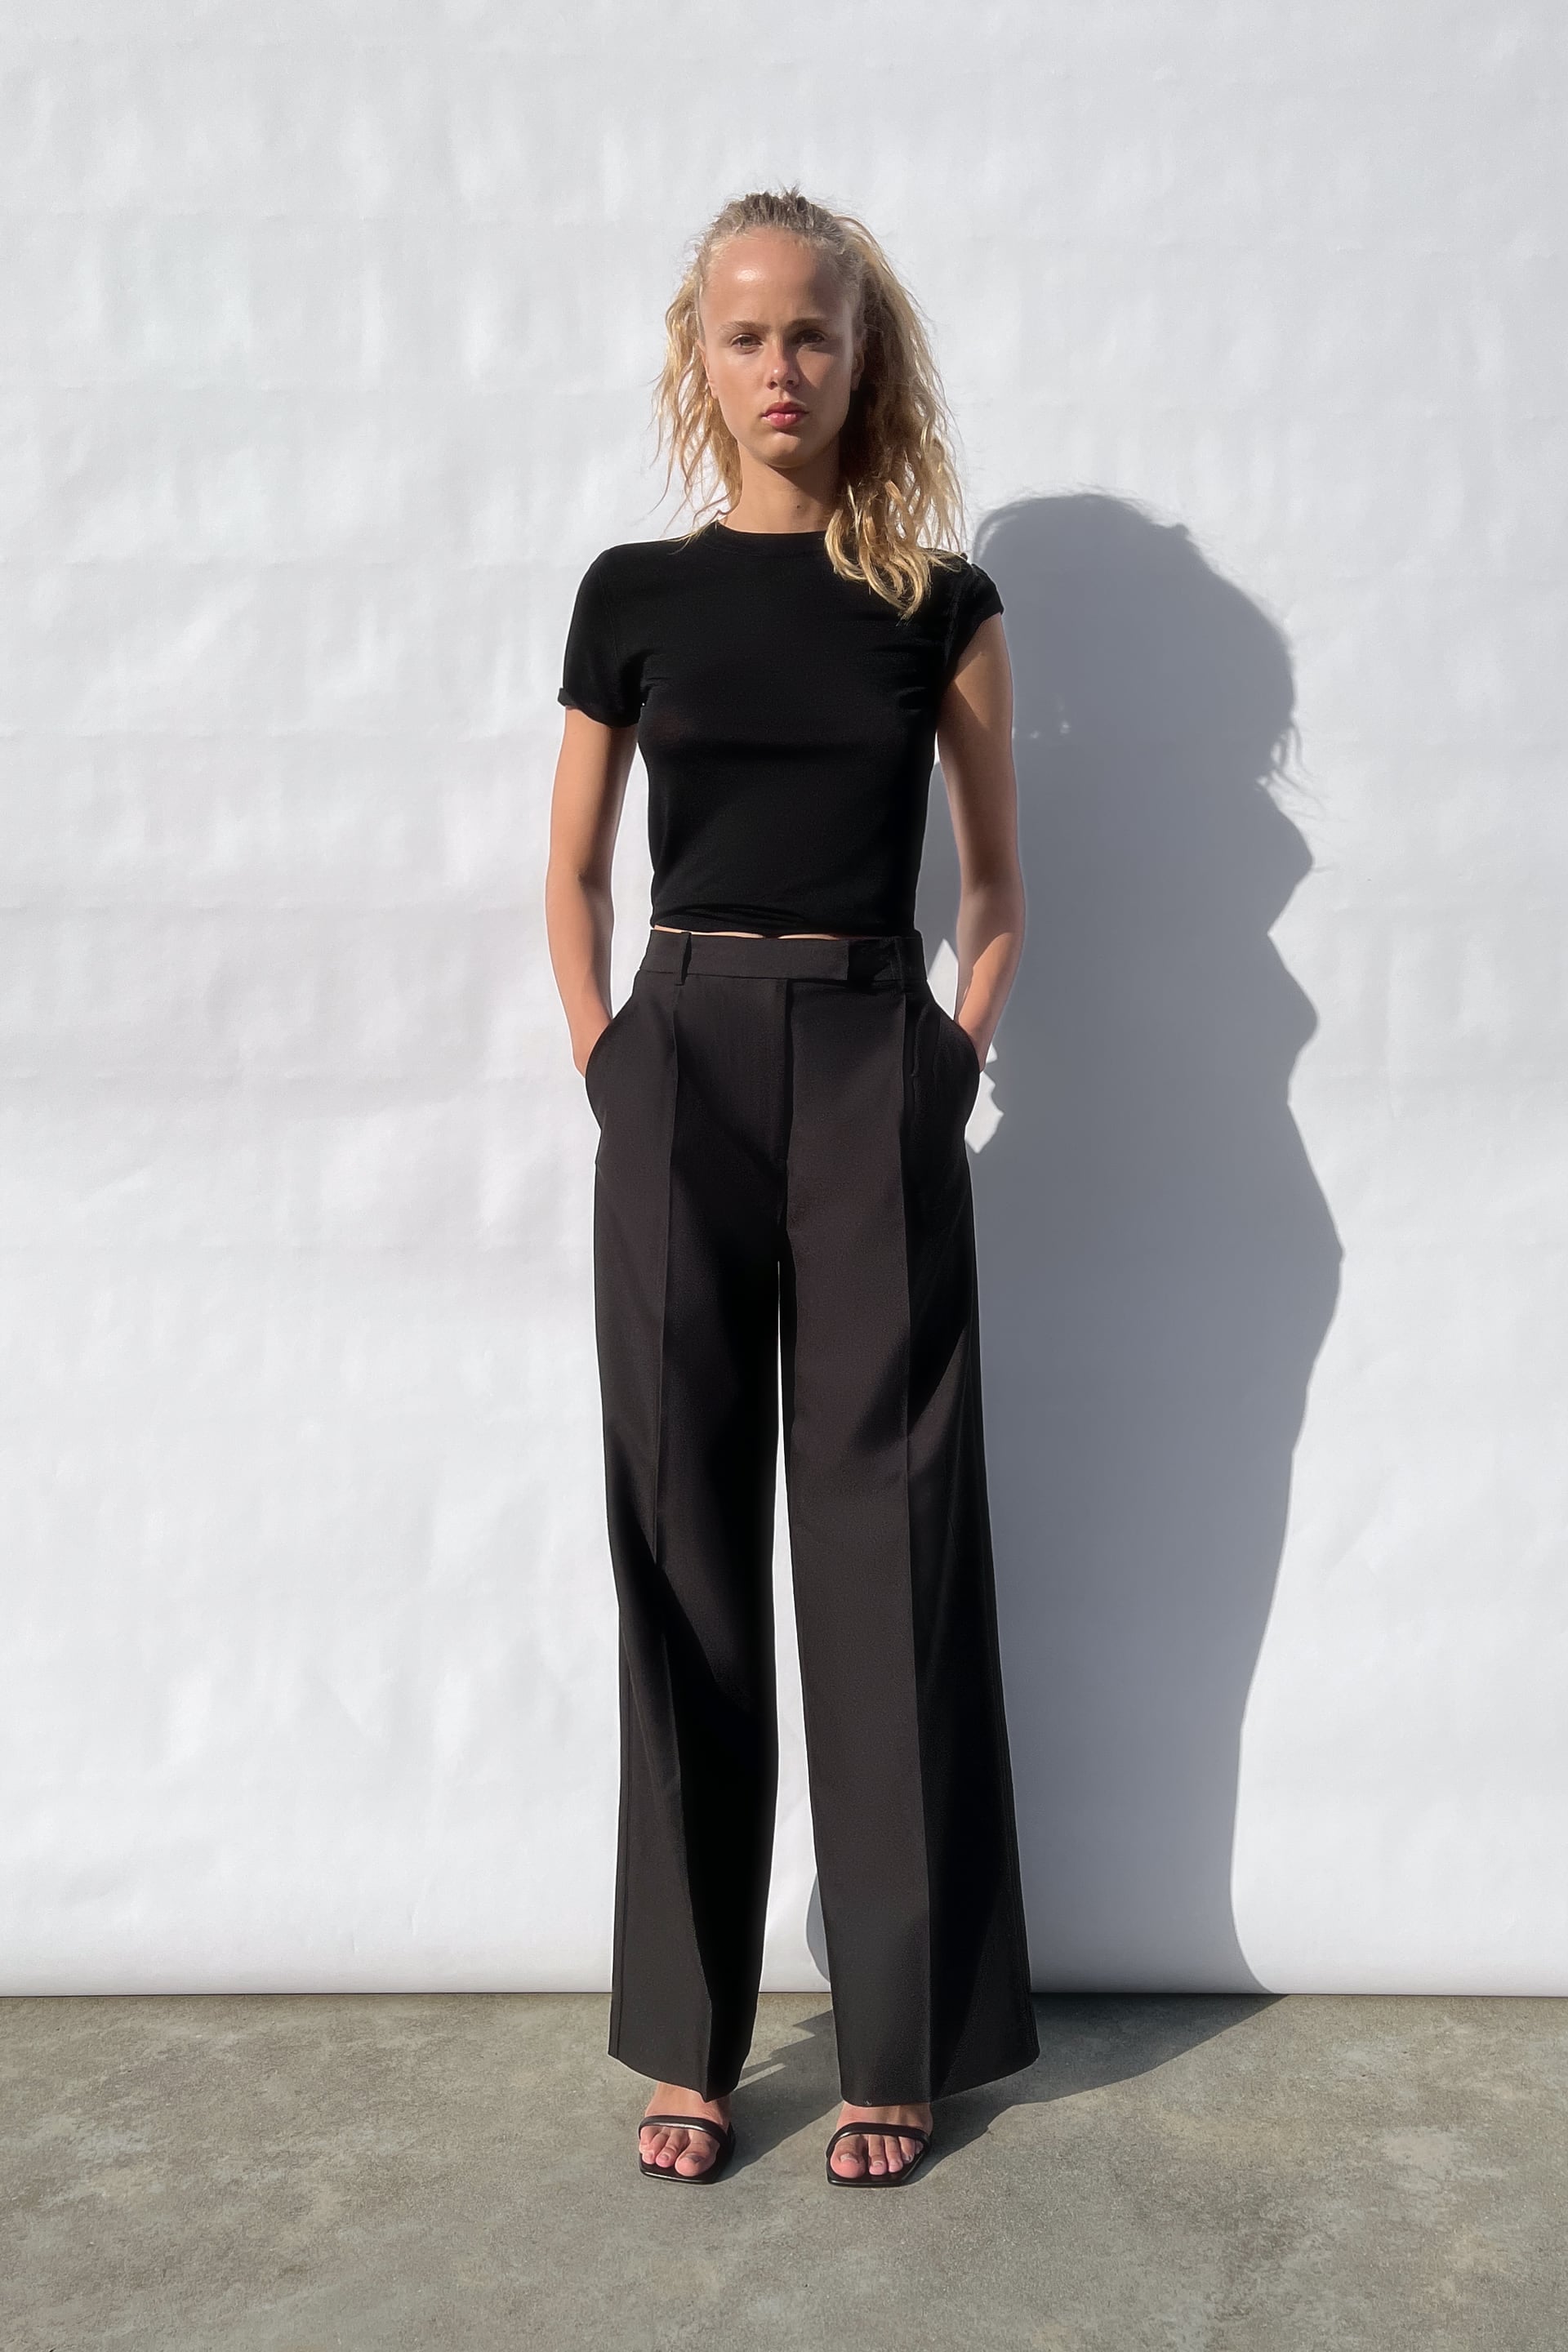 MY FAVORITE TROUSERS FROM ZARA | Gallery posted by Kelly Pineda | Lemon8